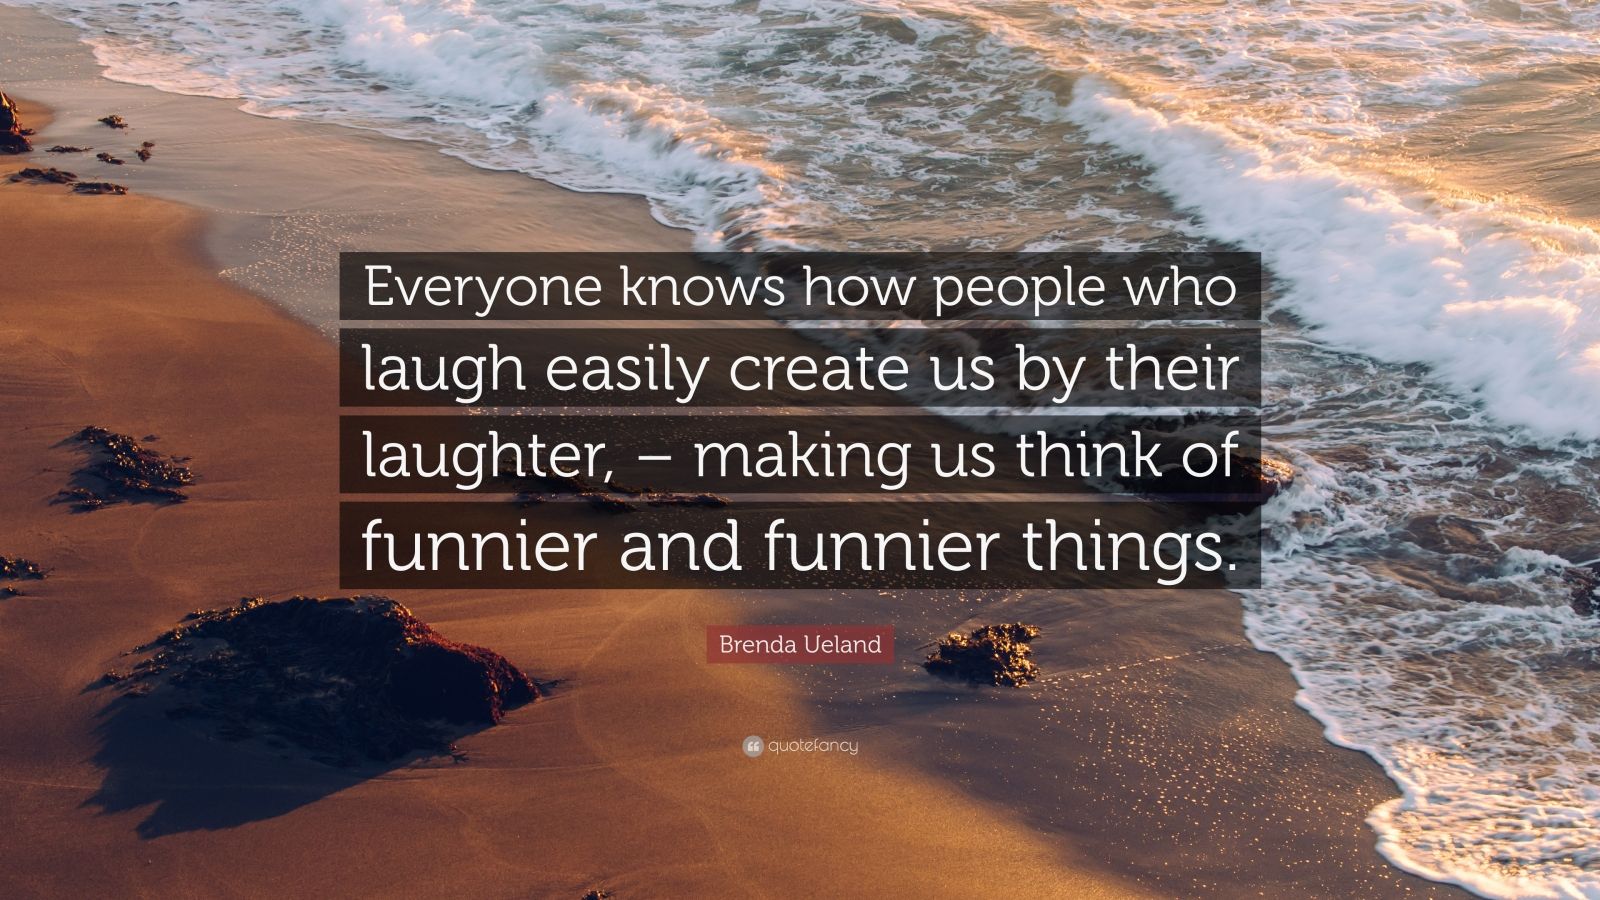 Brenda Ueland Quote: “Everyone knows how people who laugh easily create